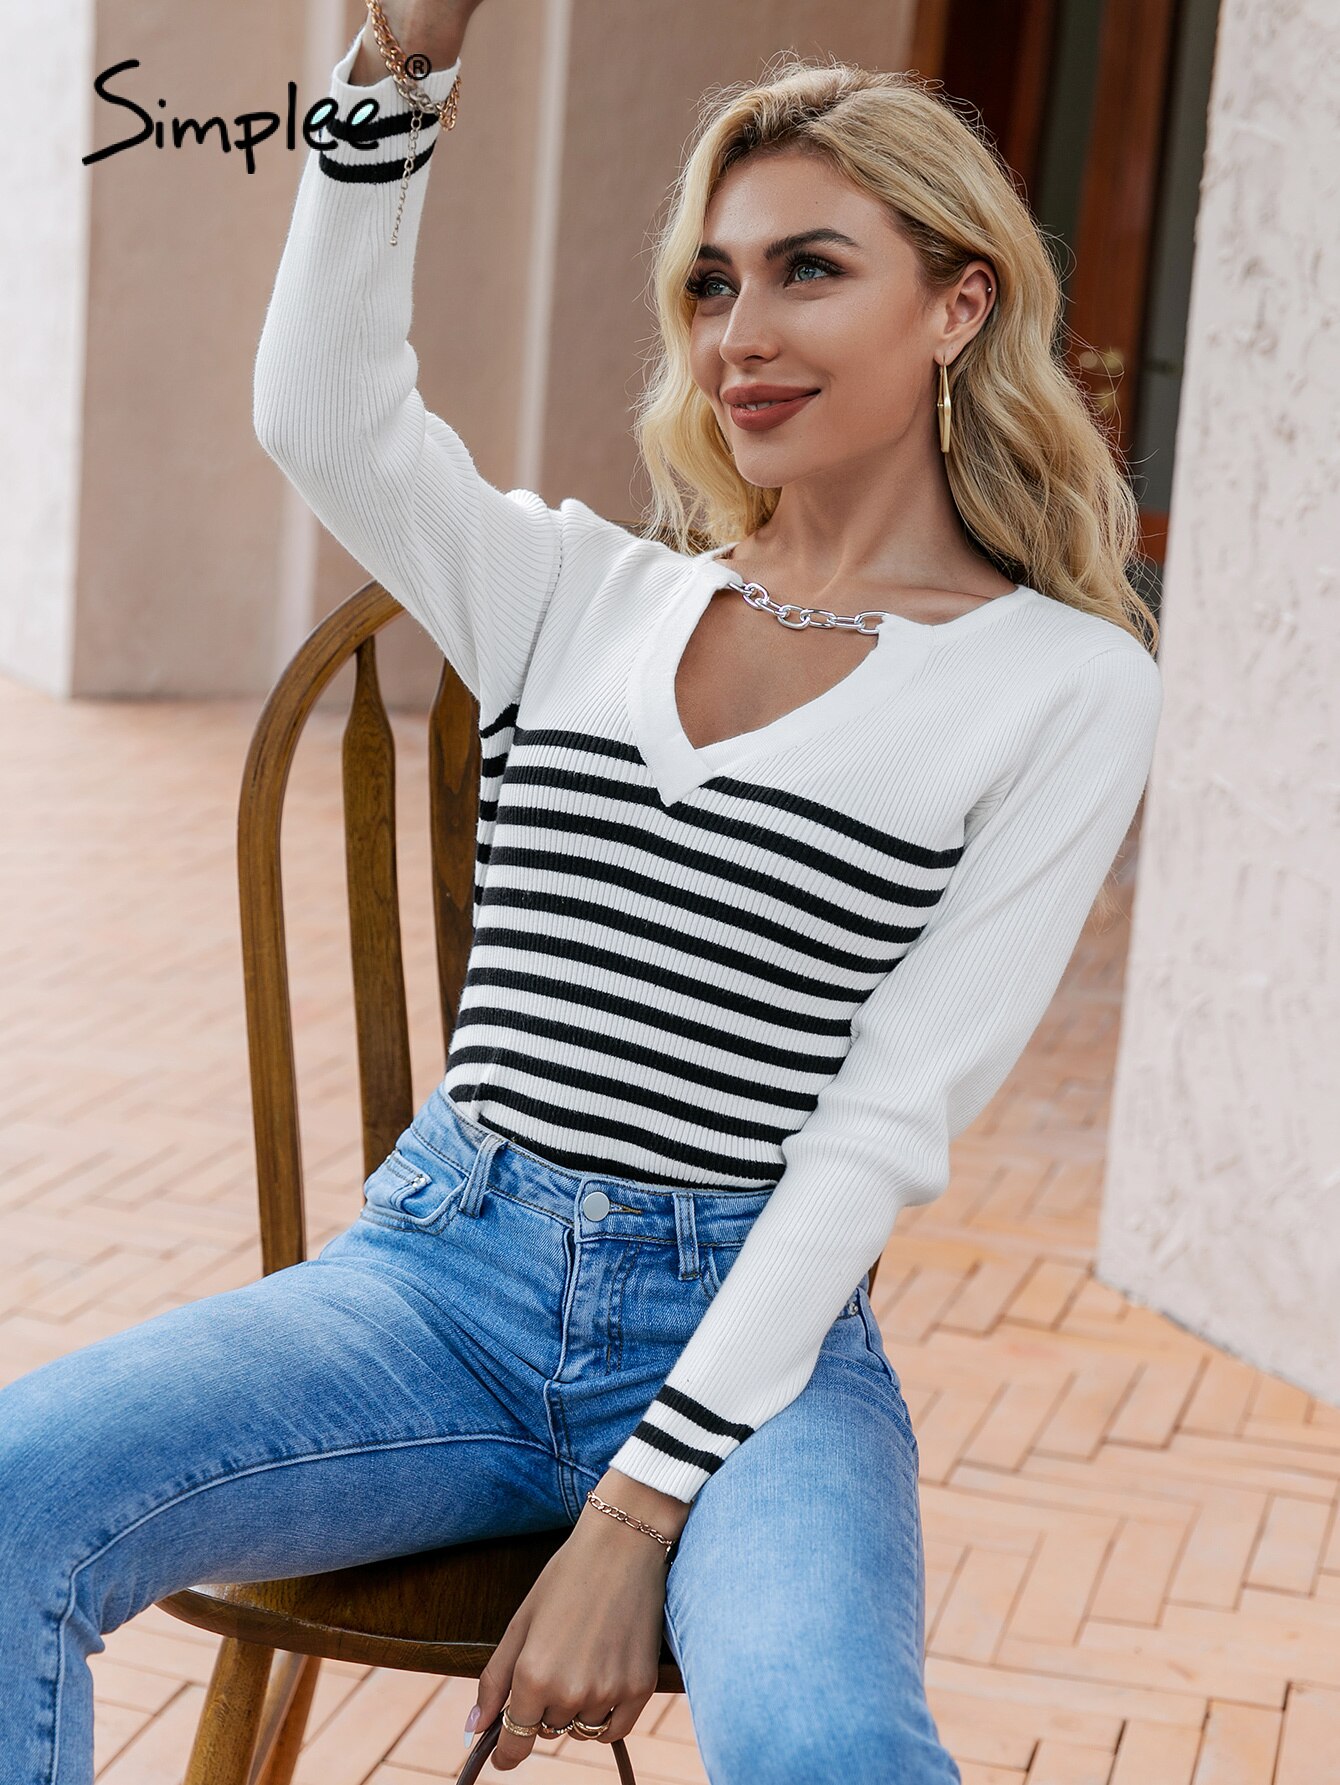 Simplee-Elegant-chain-hollow-out-striped-v-neck-women-sweater-spring-Casual-long-sleeve-female-pullover-3